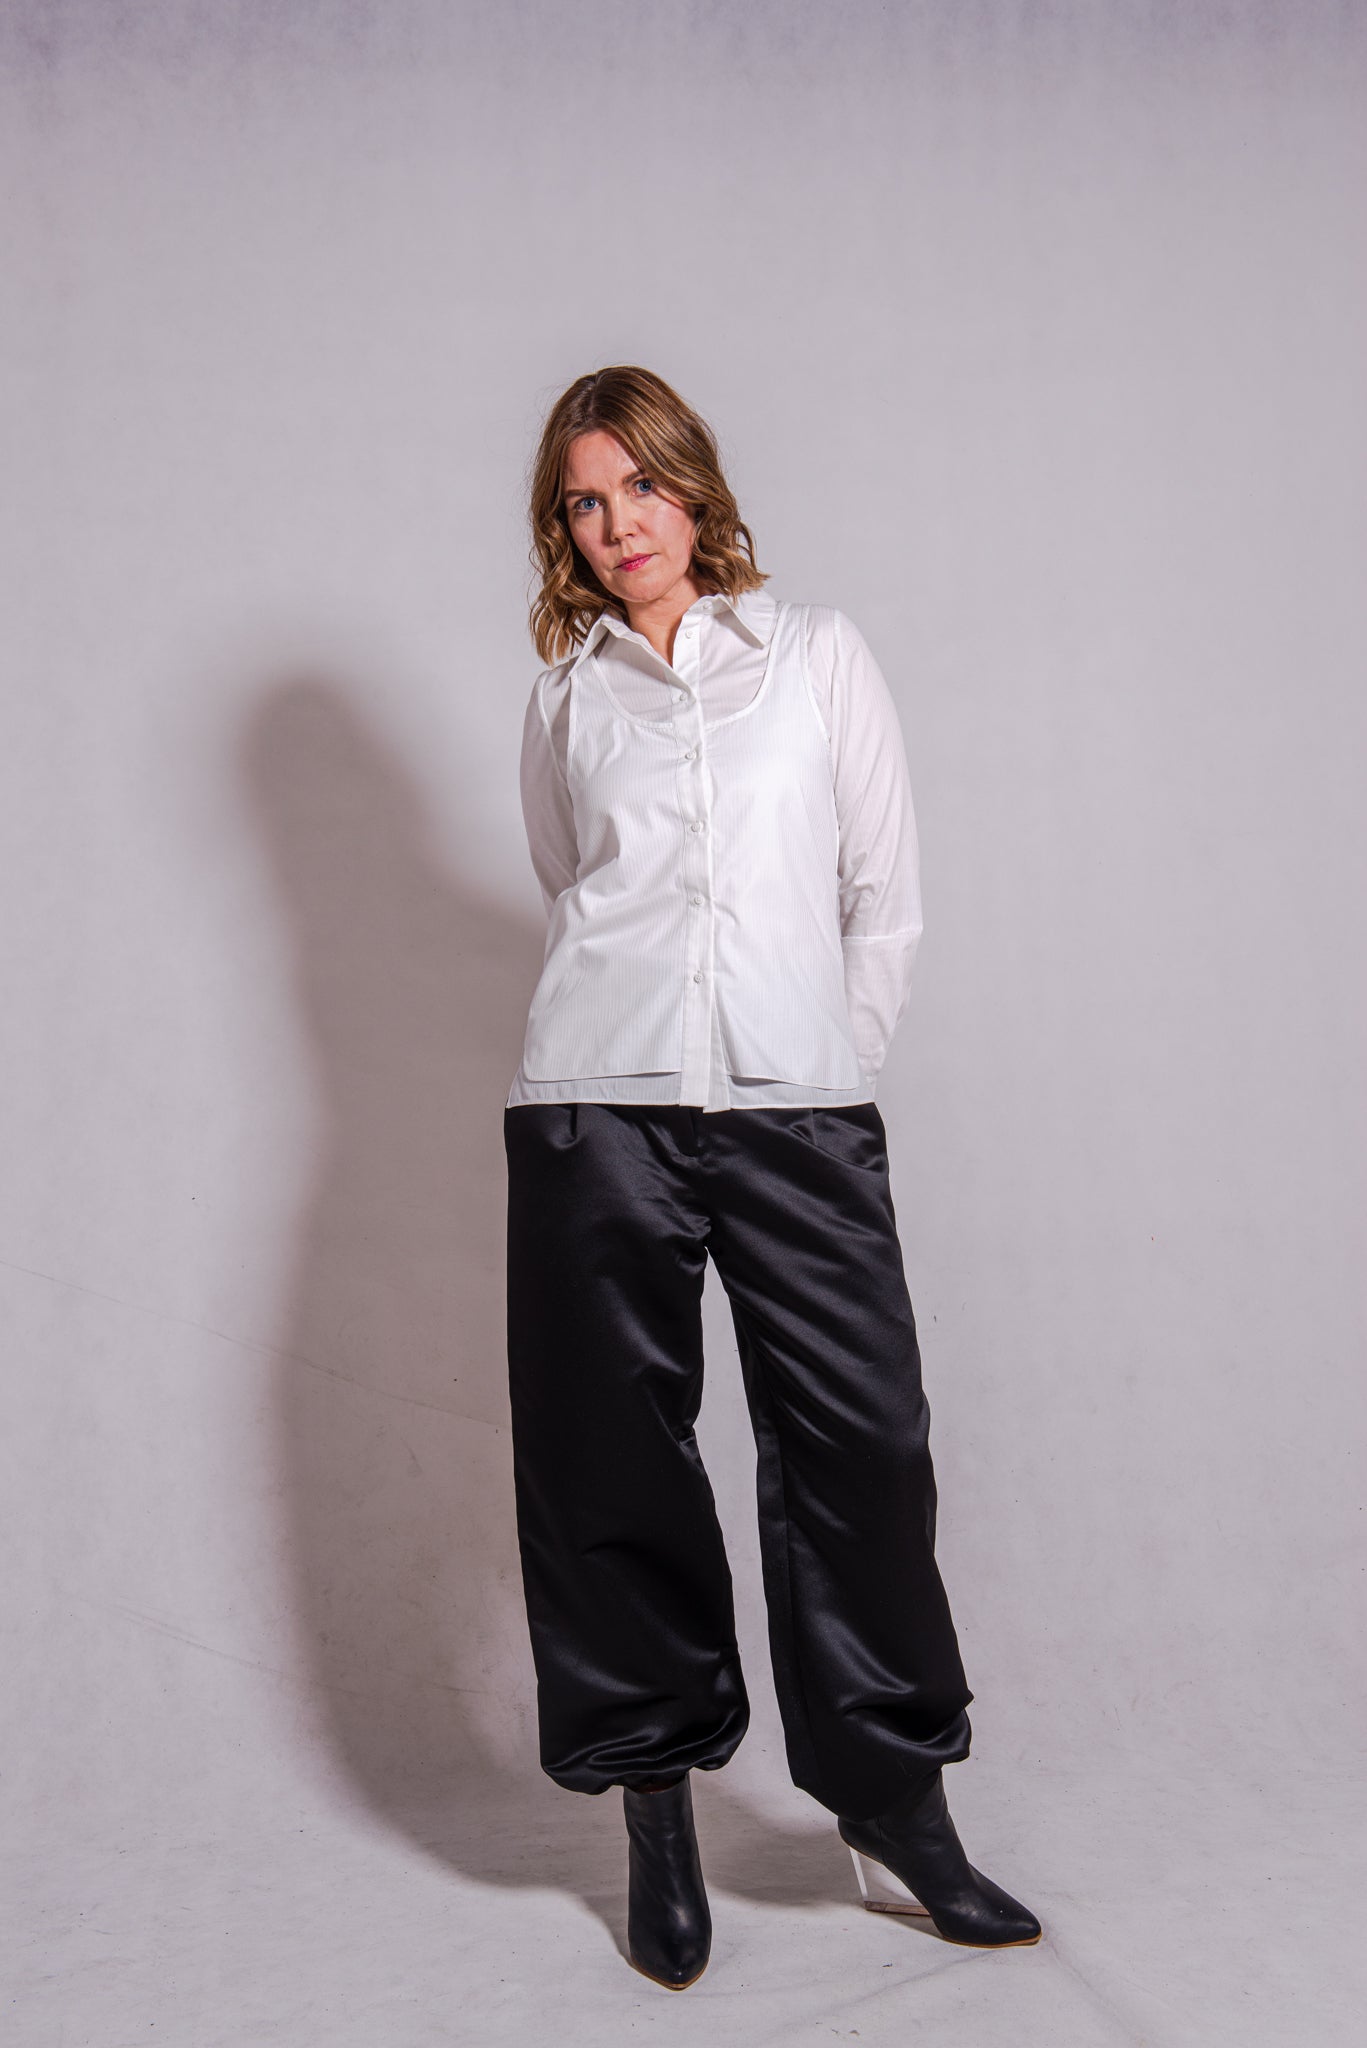 Women wearing Abbey shirt white paired with Agnes trousers (black) against a grey wall.